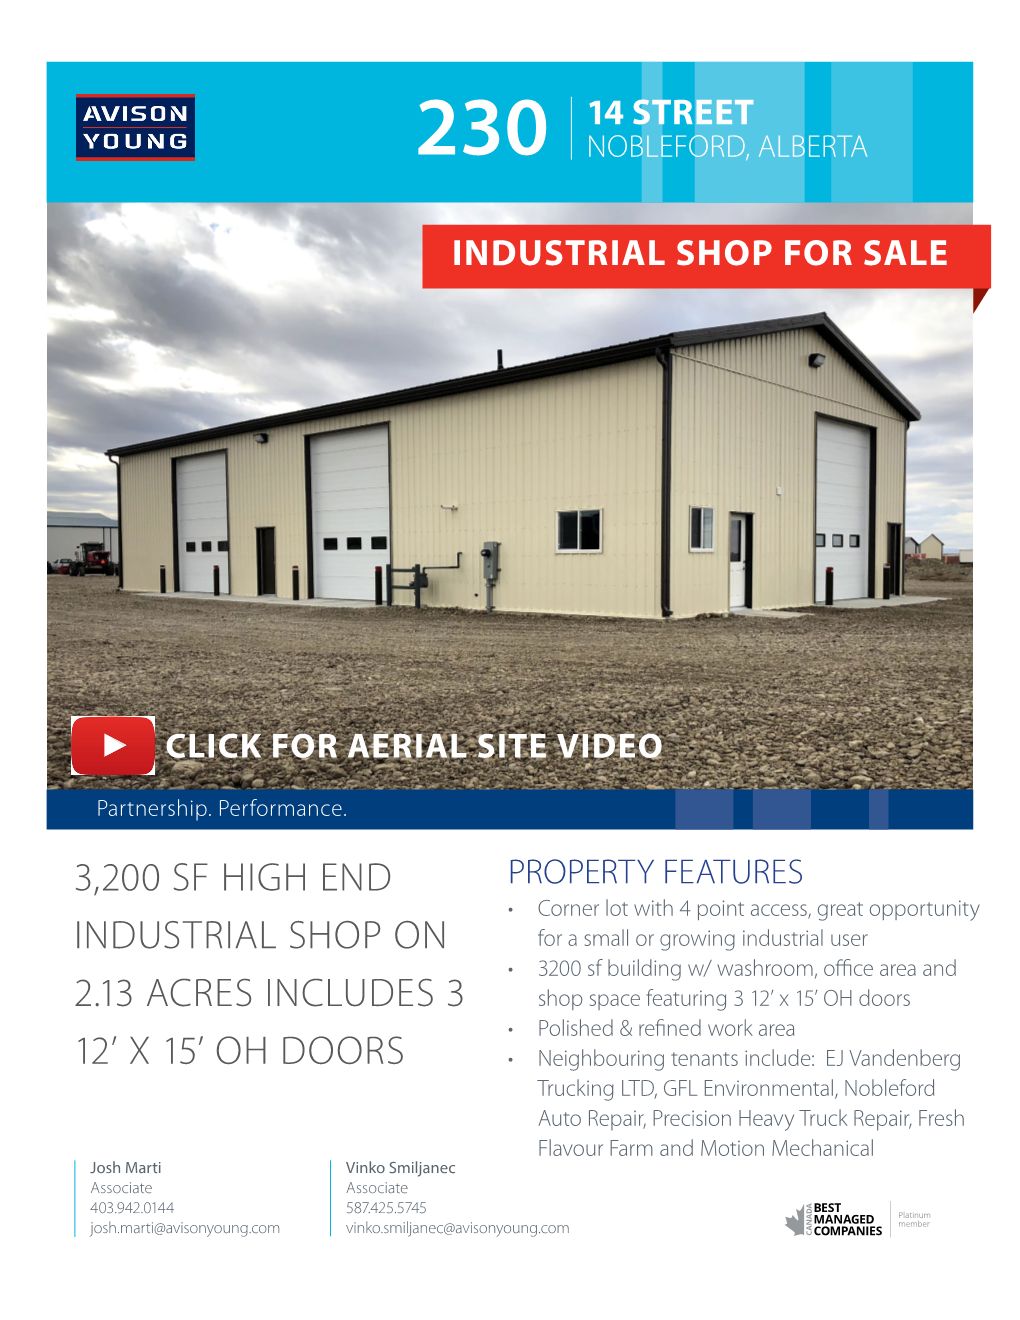 3,200 Sf High End Industrial Shop on 2.13 Acres Includes